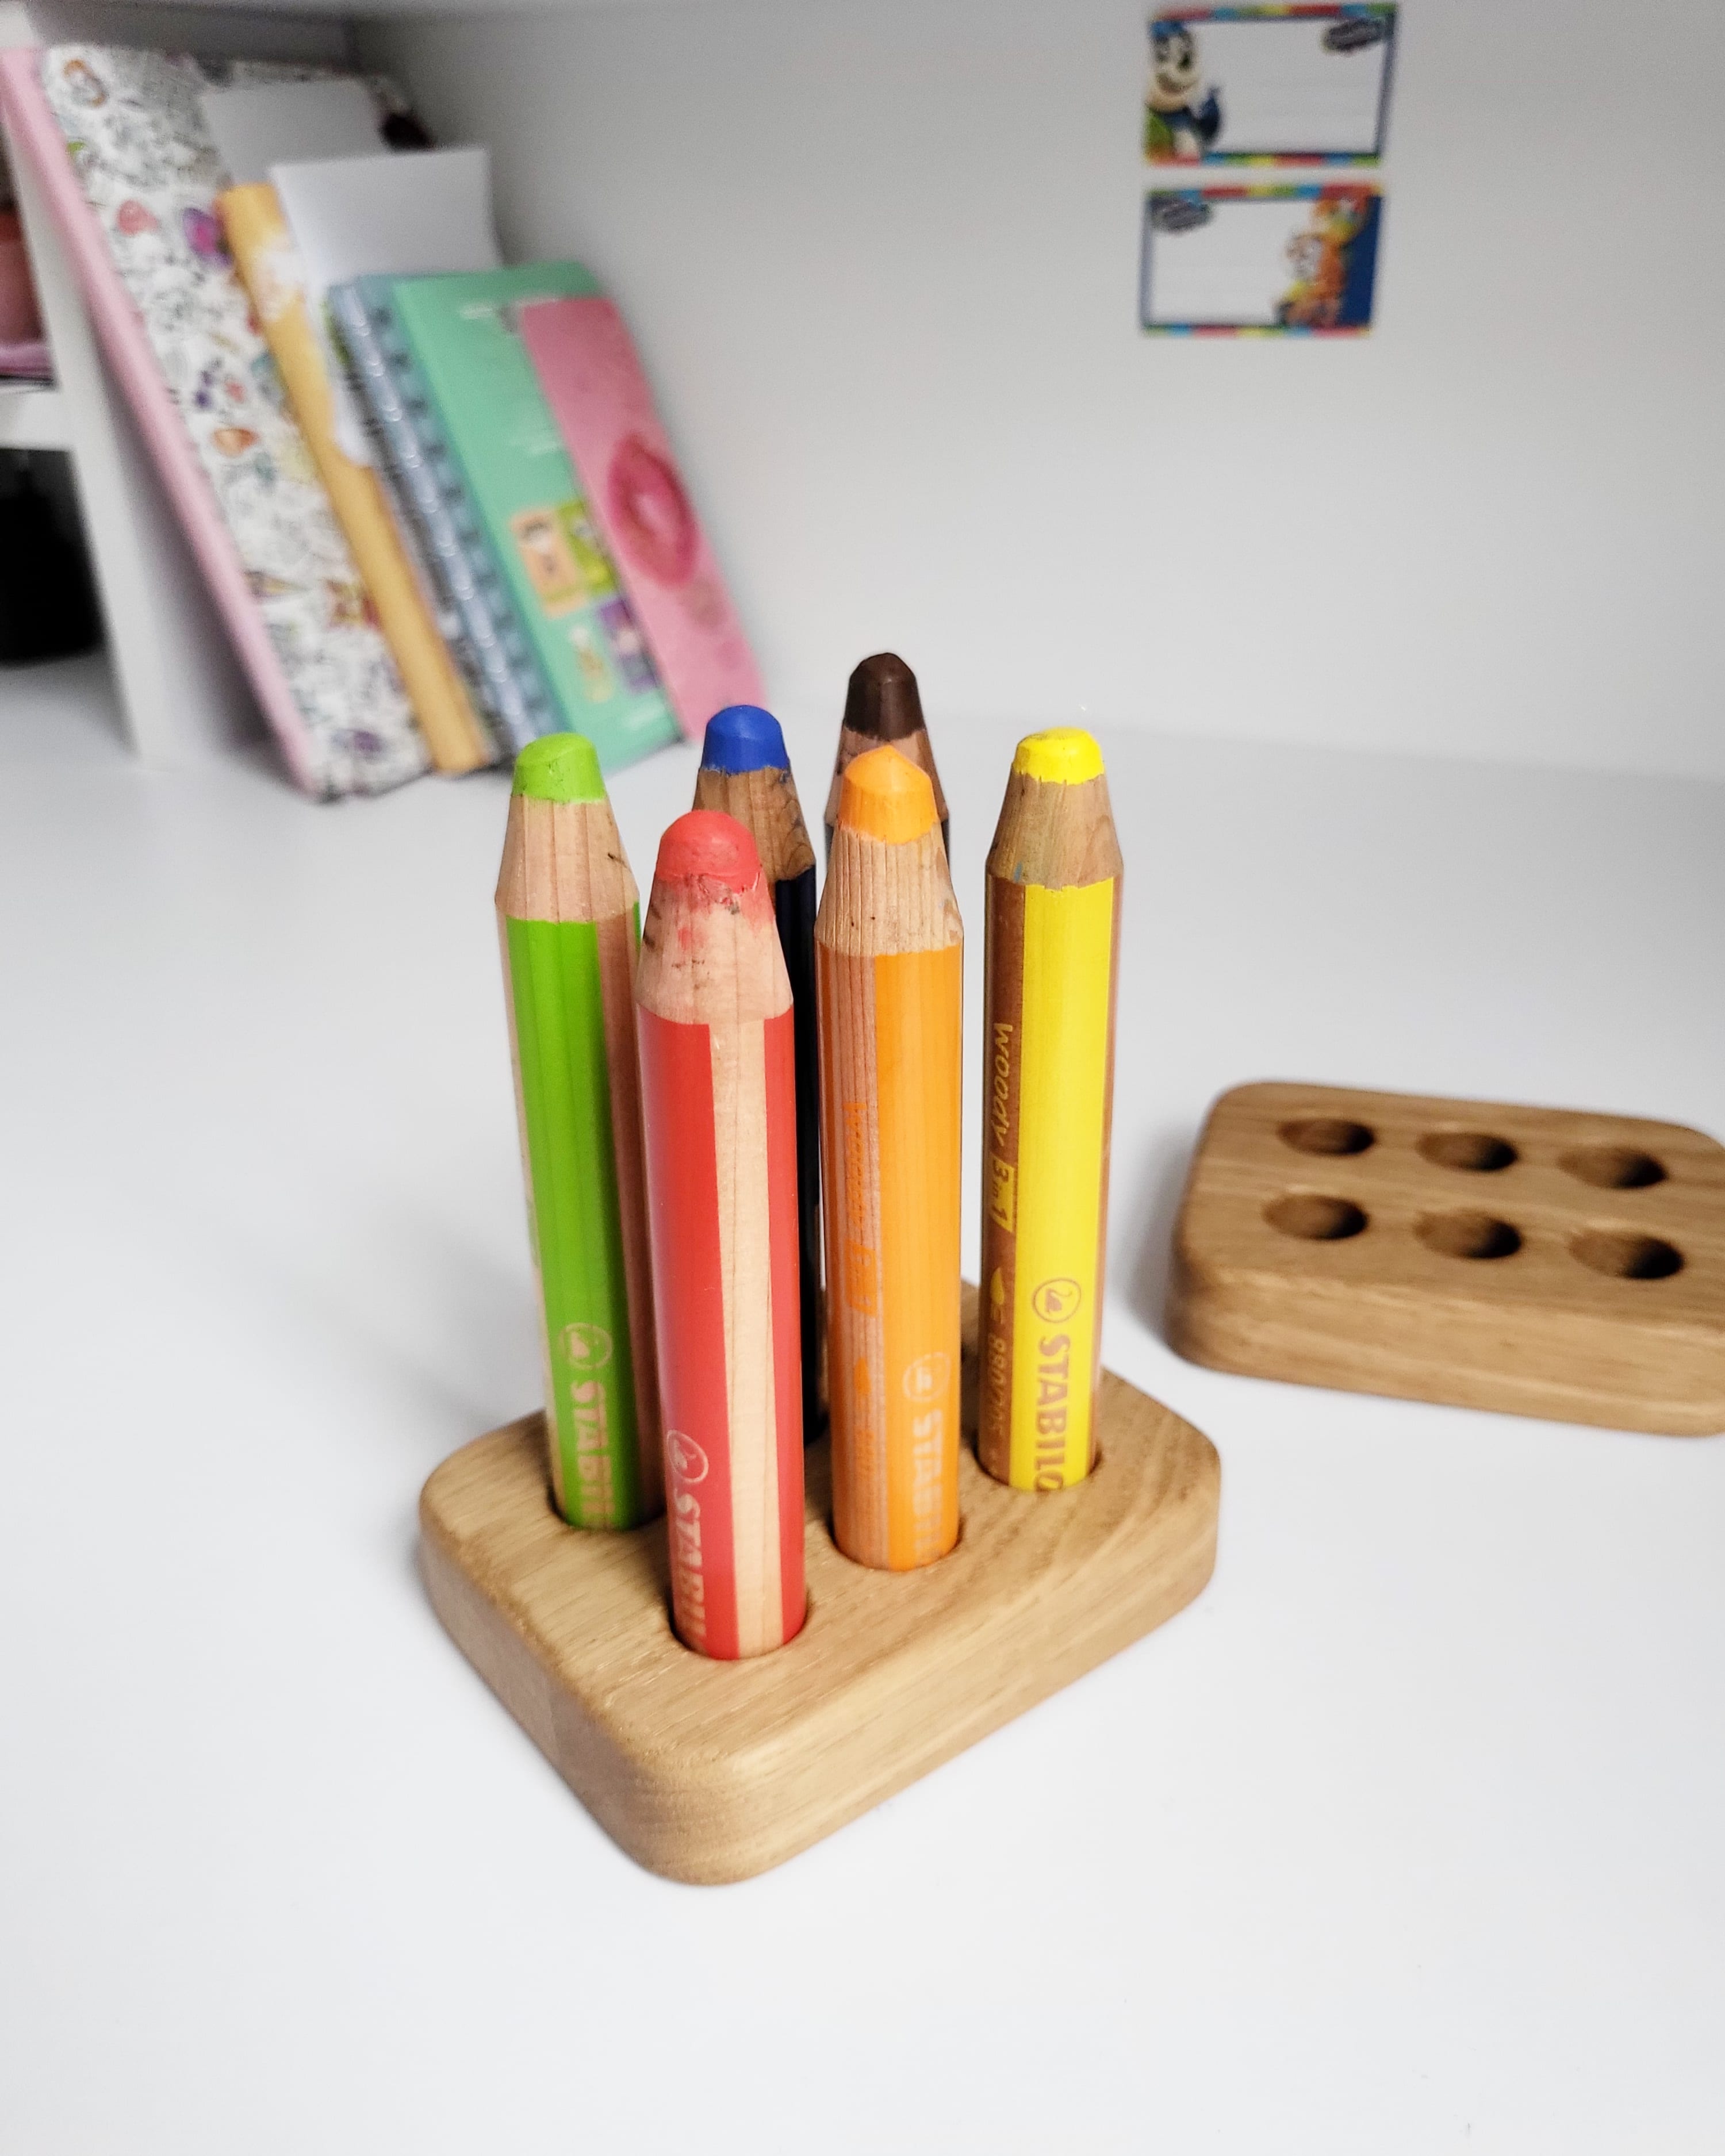 Stabilo pencil holder for 6 woody pencils 3 in 1, without pencils